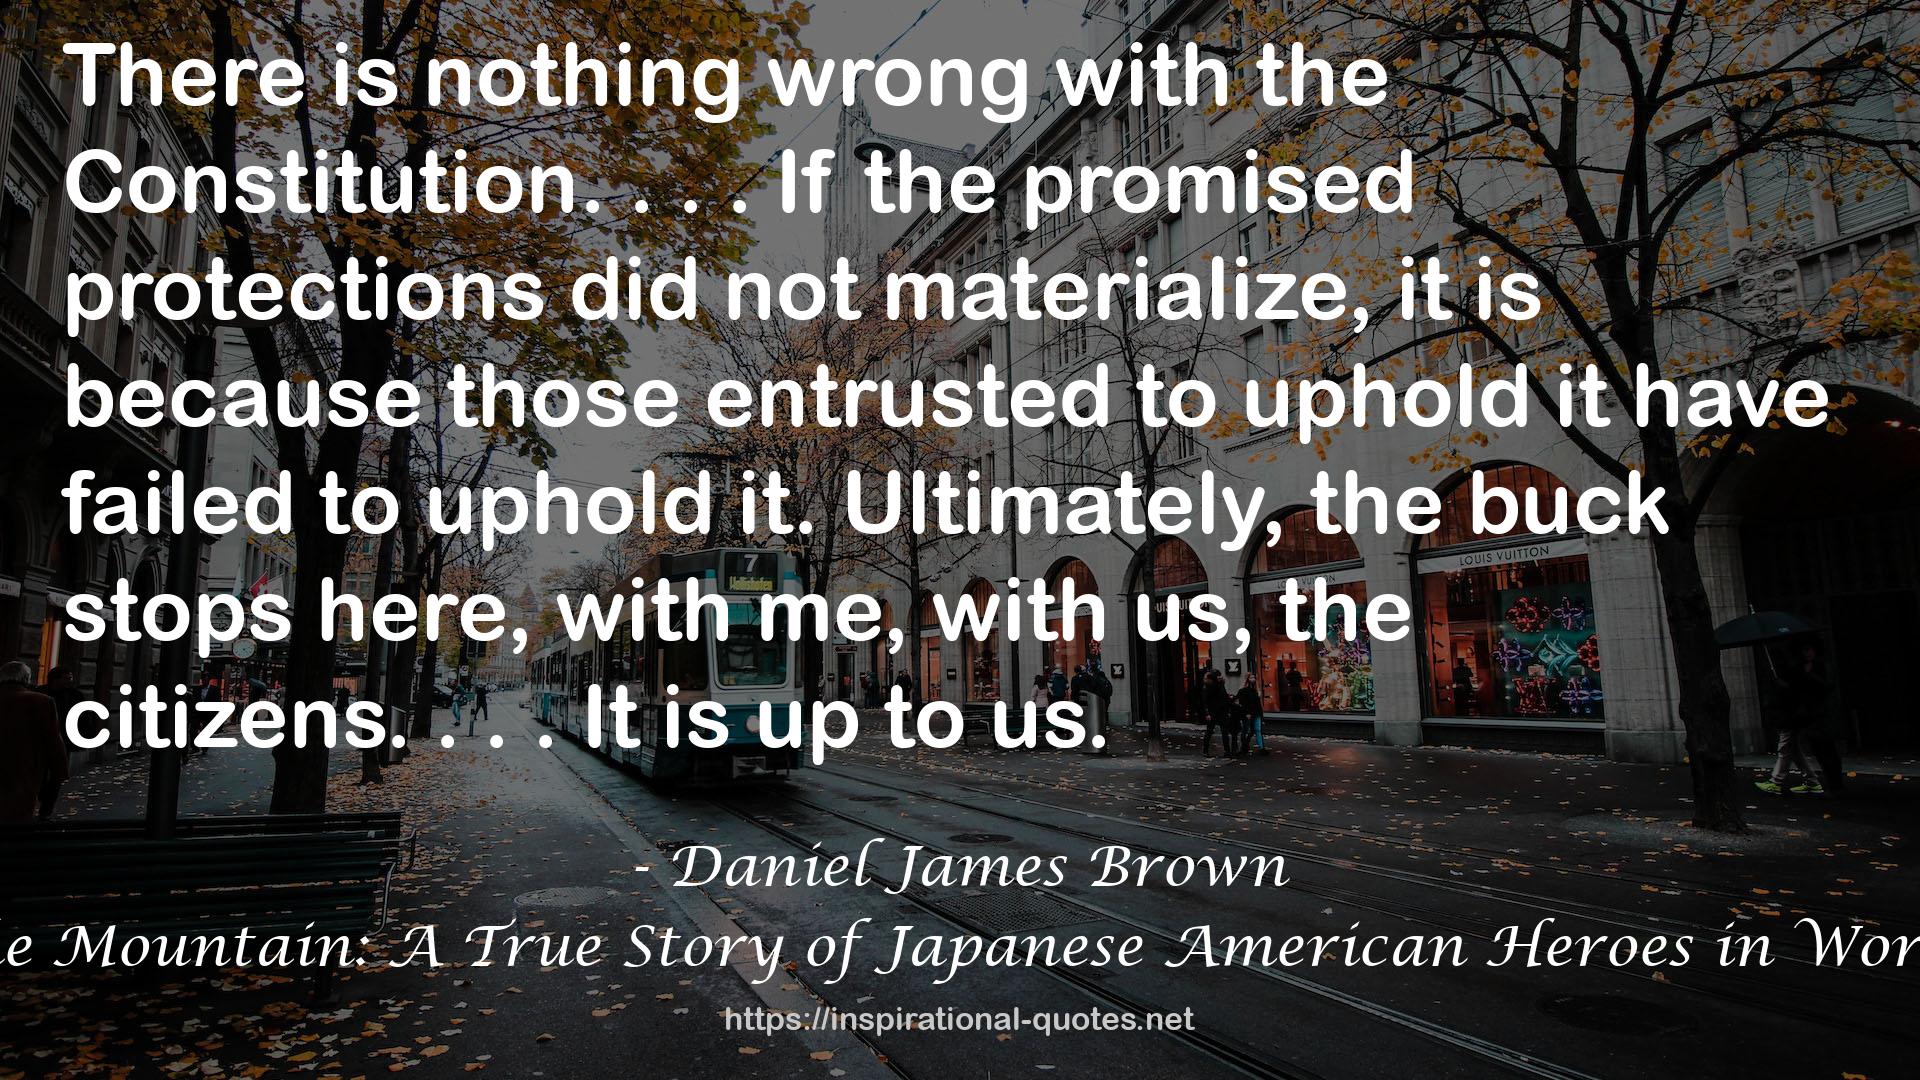 Facing the Mountain: A True Story of Japanese American Heroes in World War II QUOTES